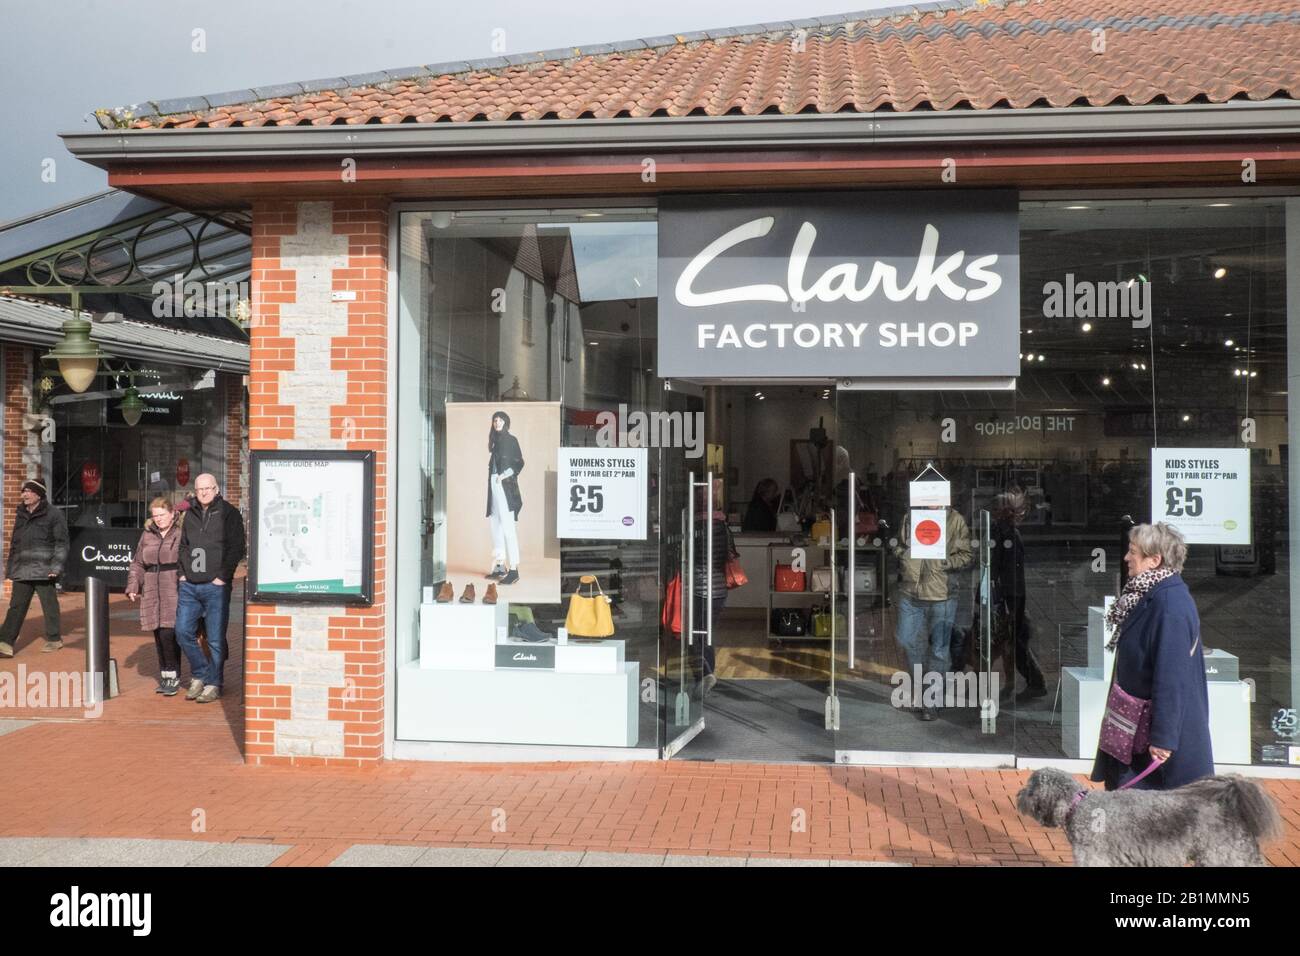 woolwich clarks outlet